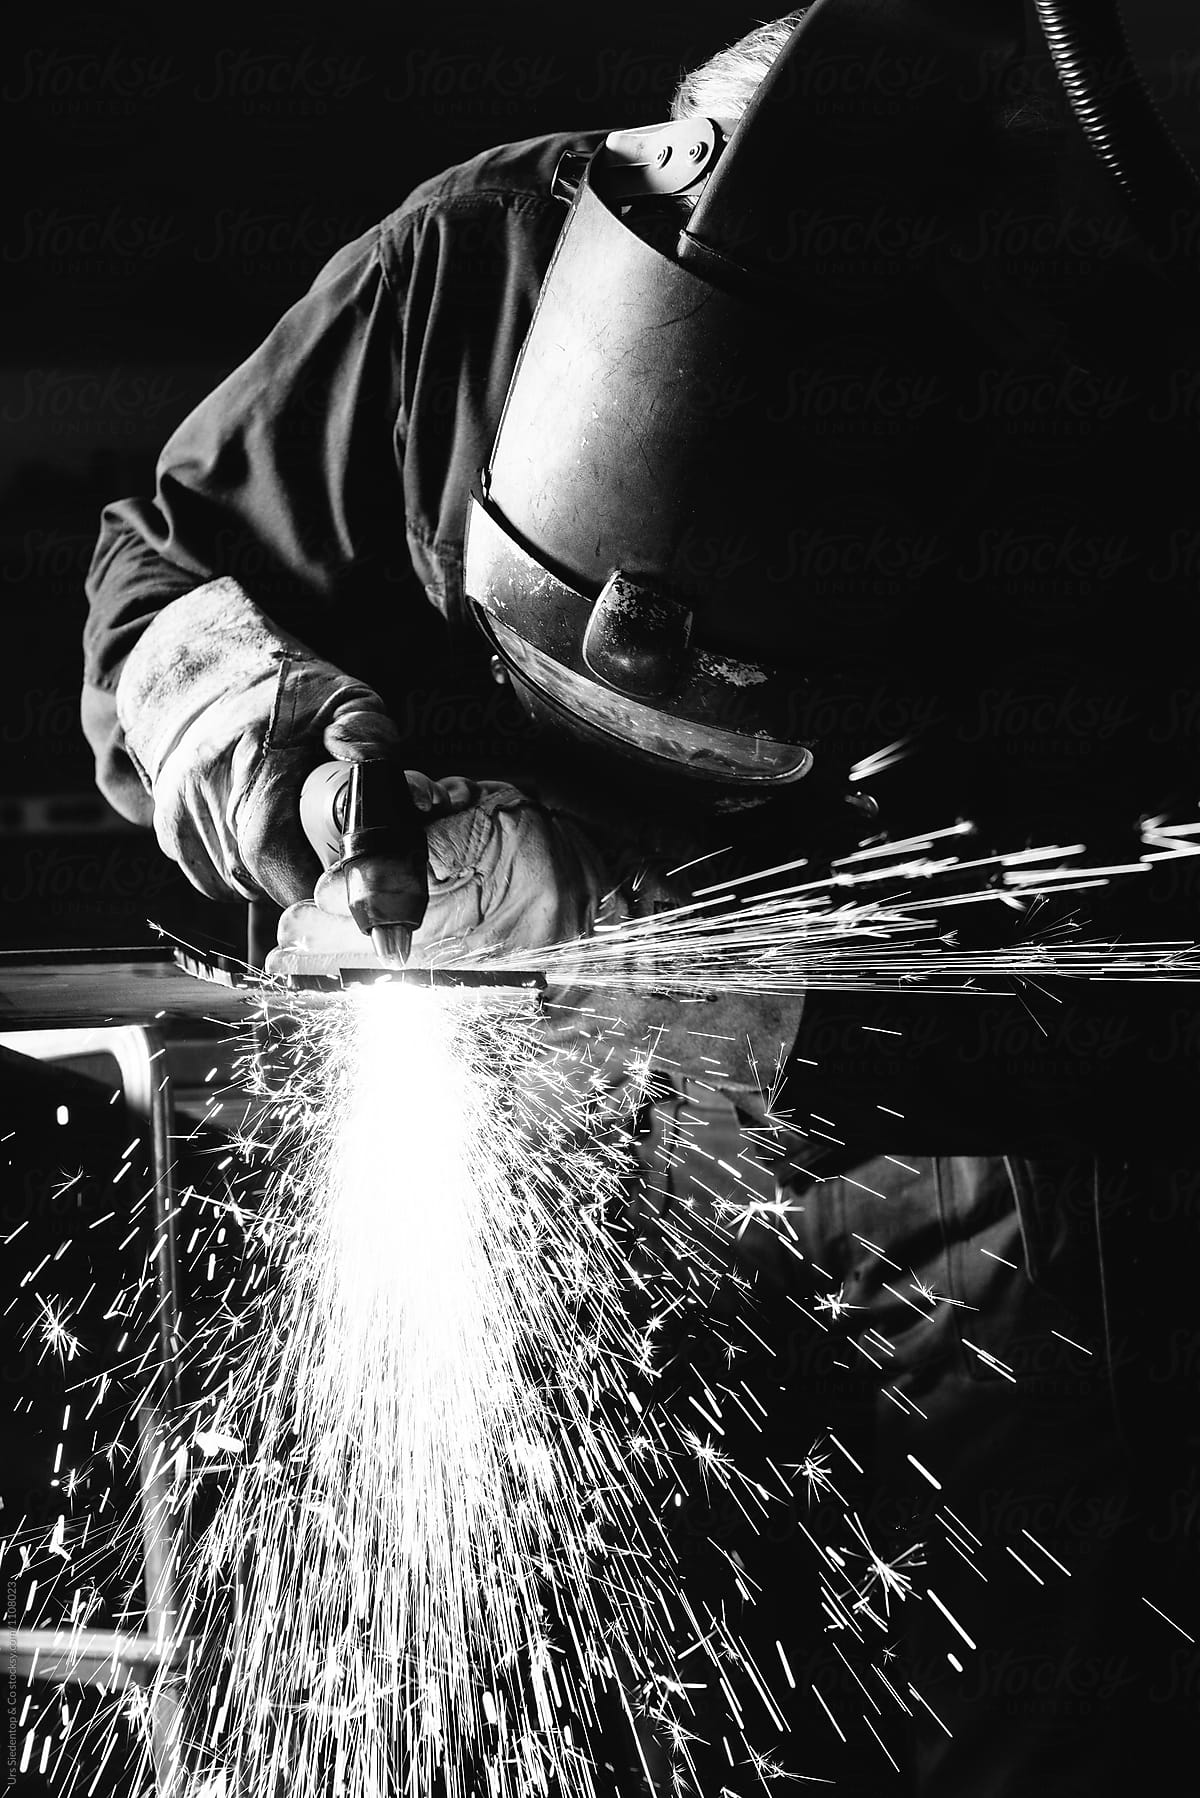 Close up black and white image of steel worker cutting iron with